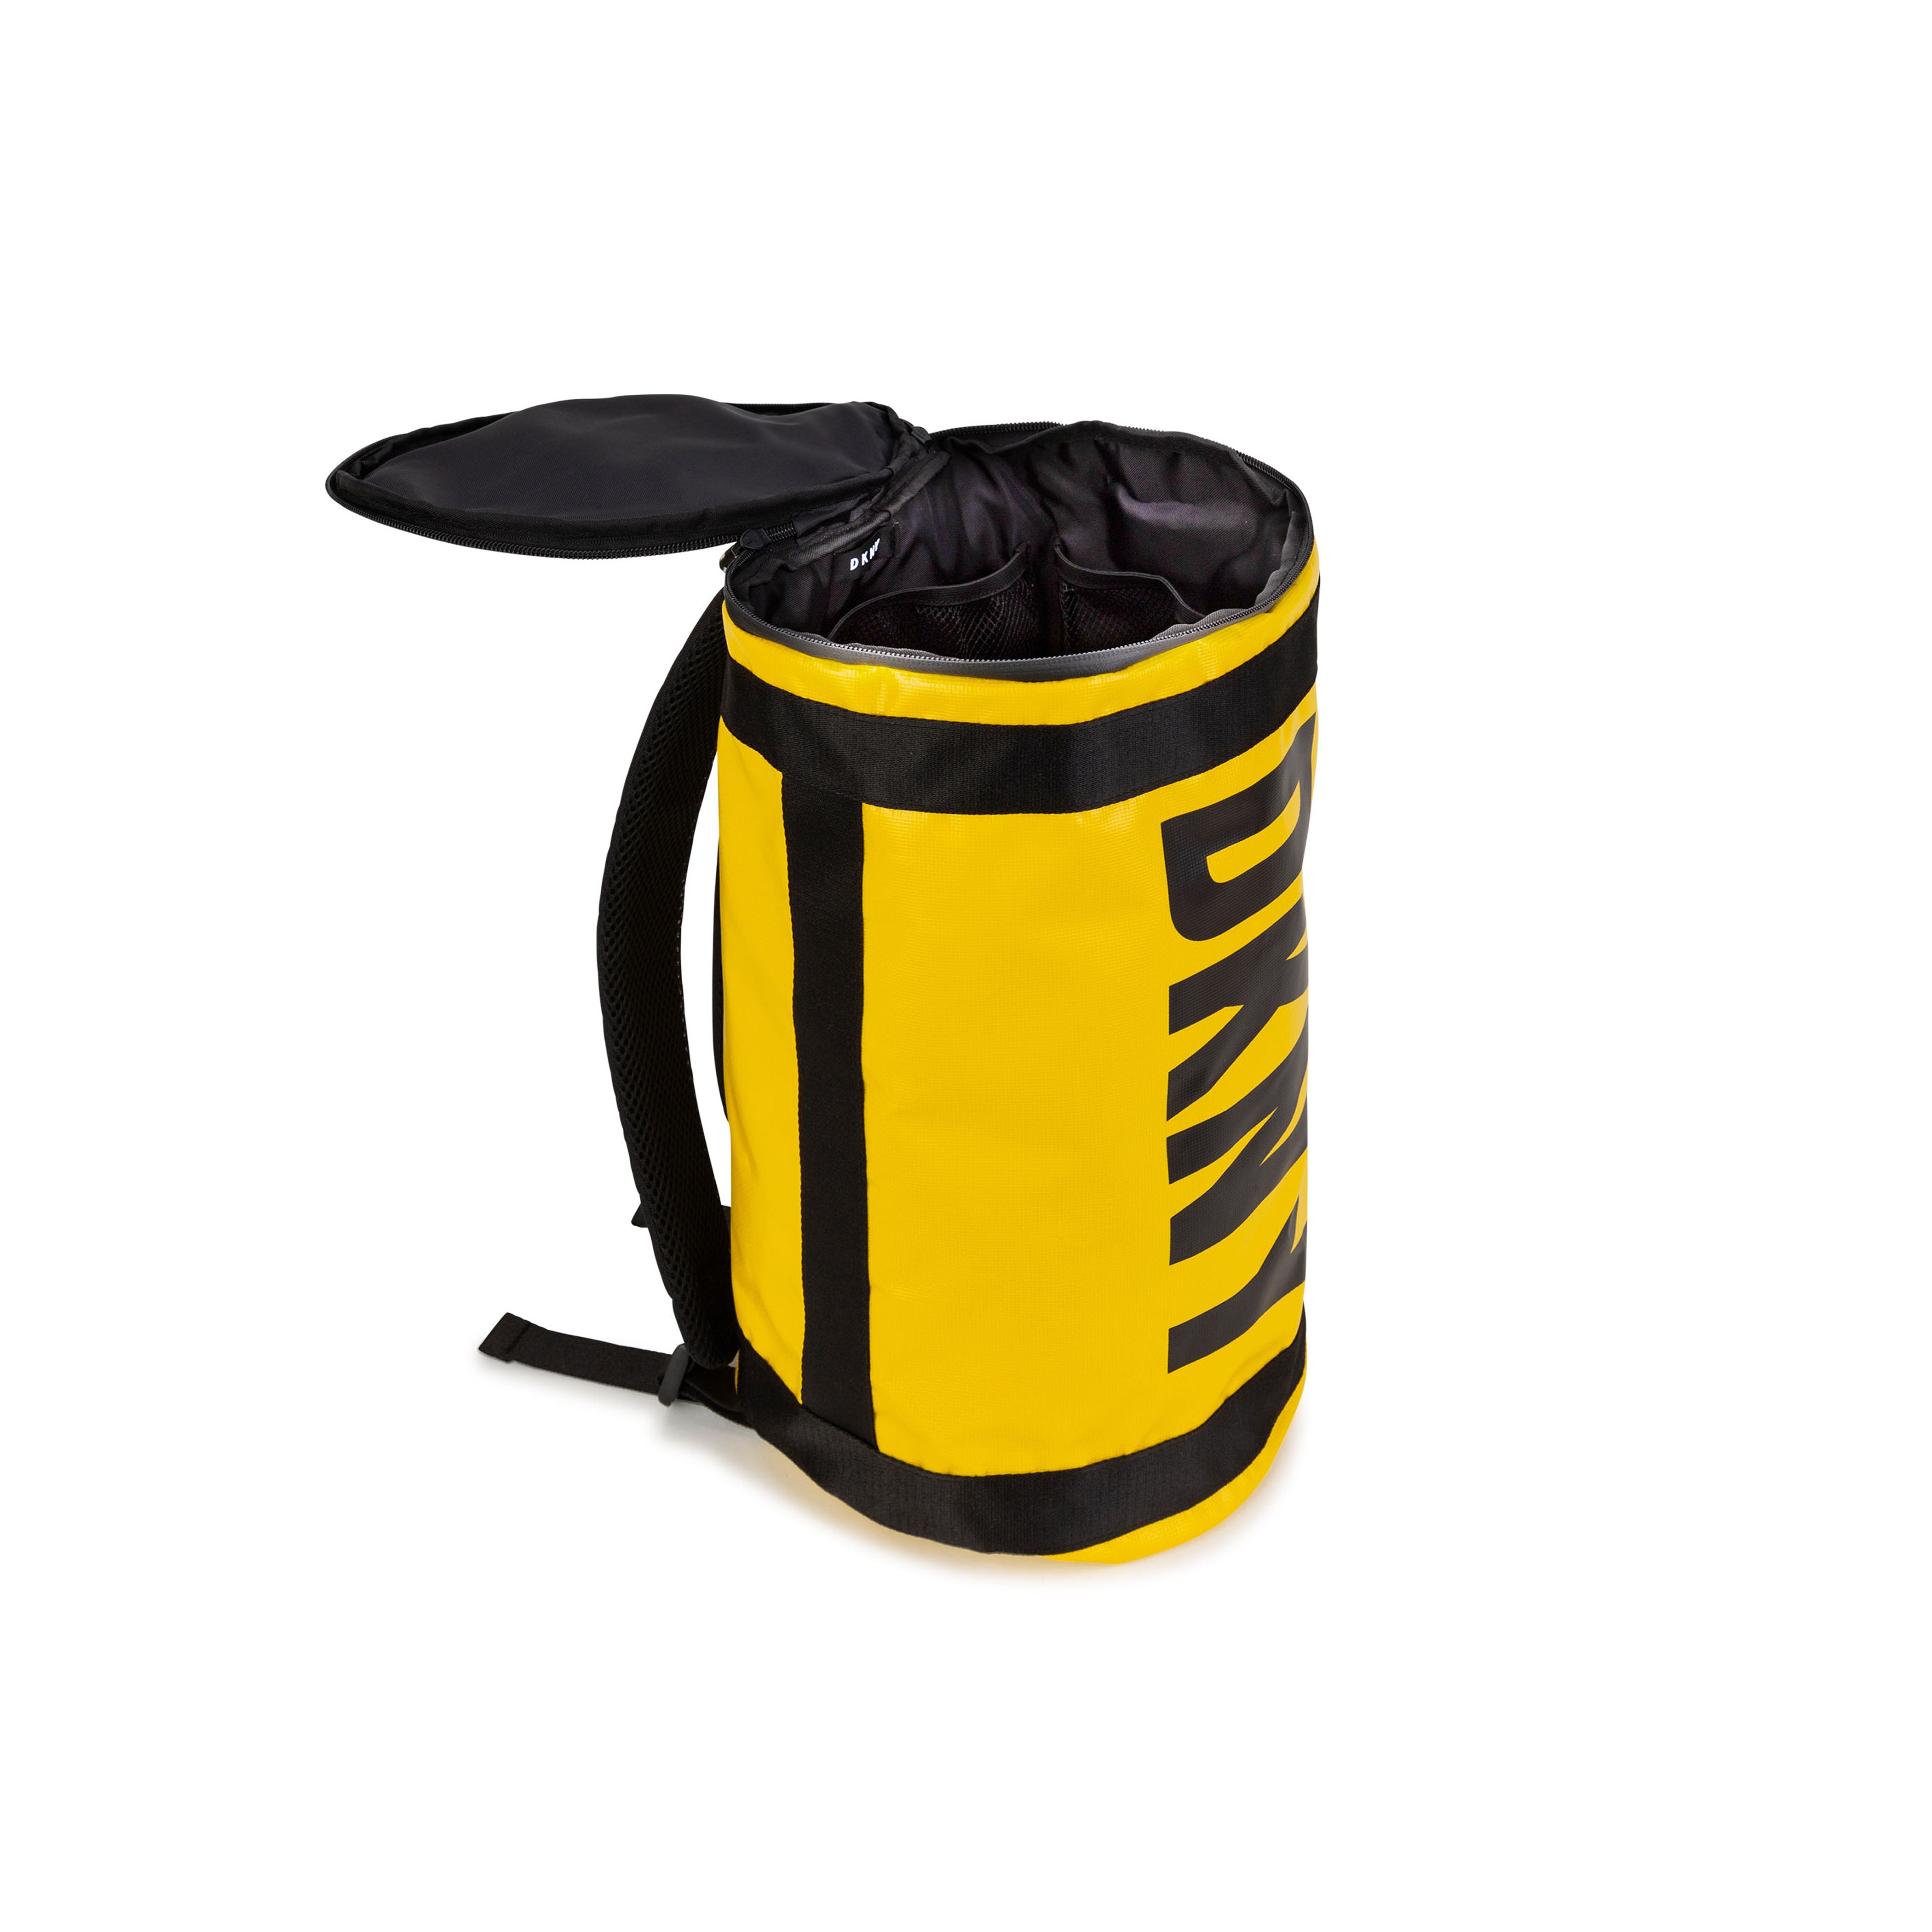 DKNY Yellow Backpack